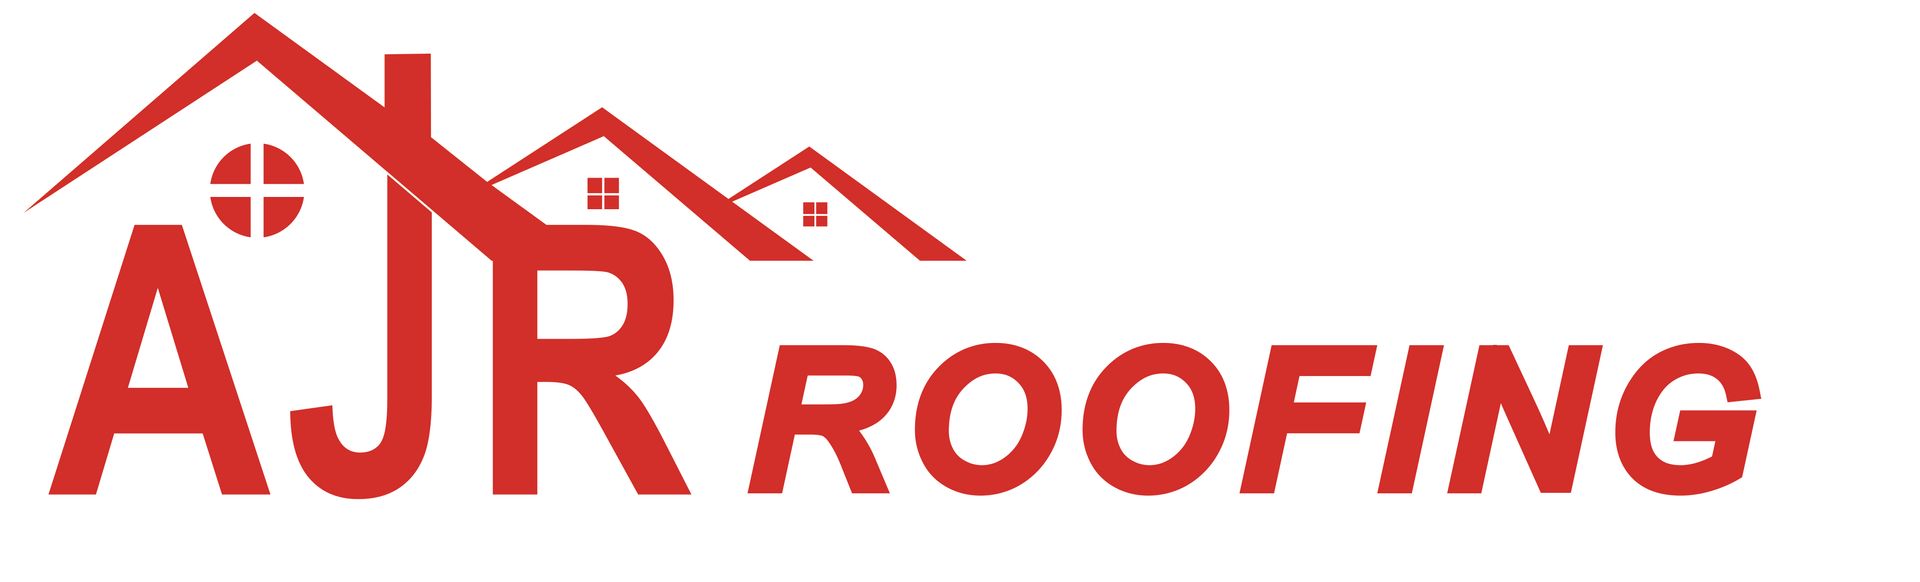 A red logo for aj roofing with a house and a roof.